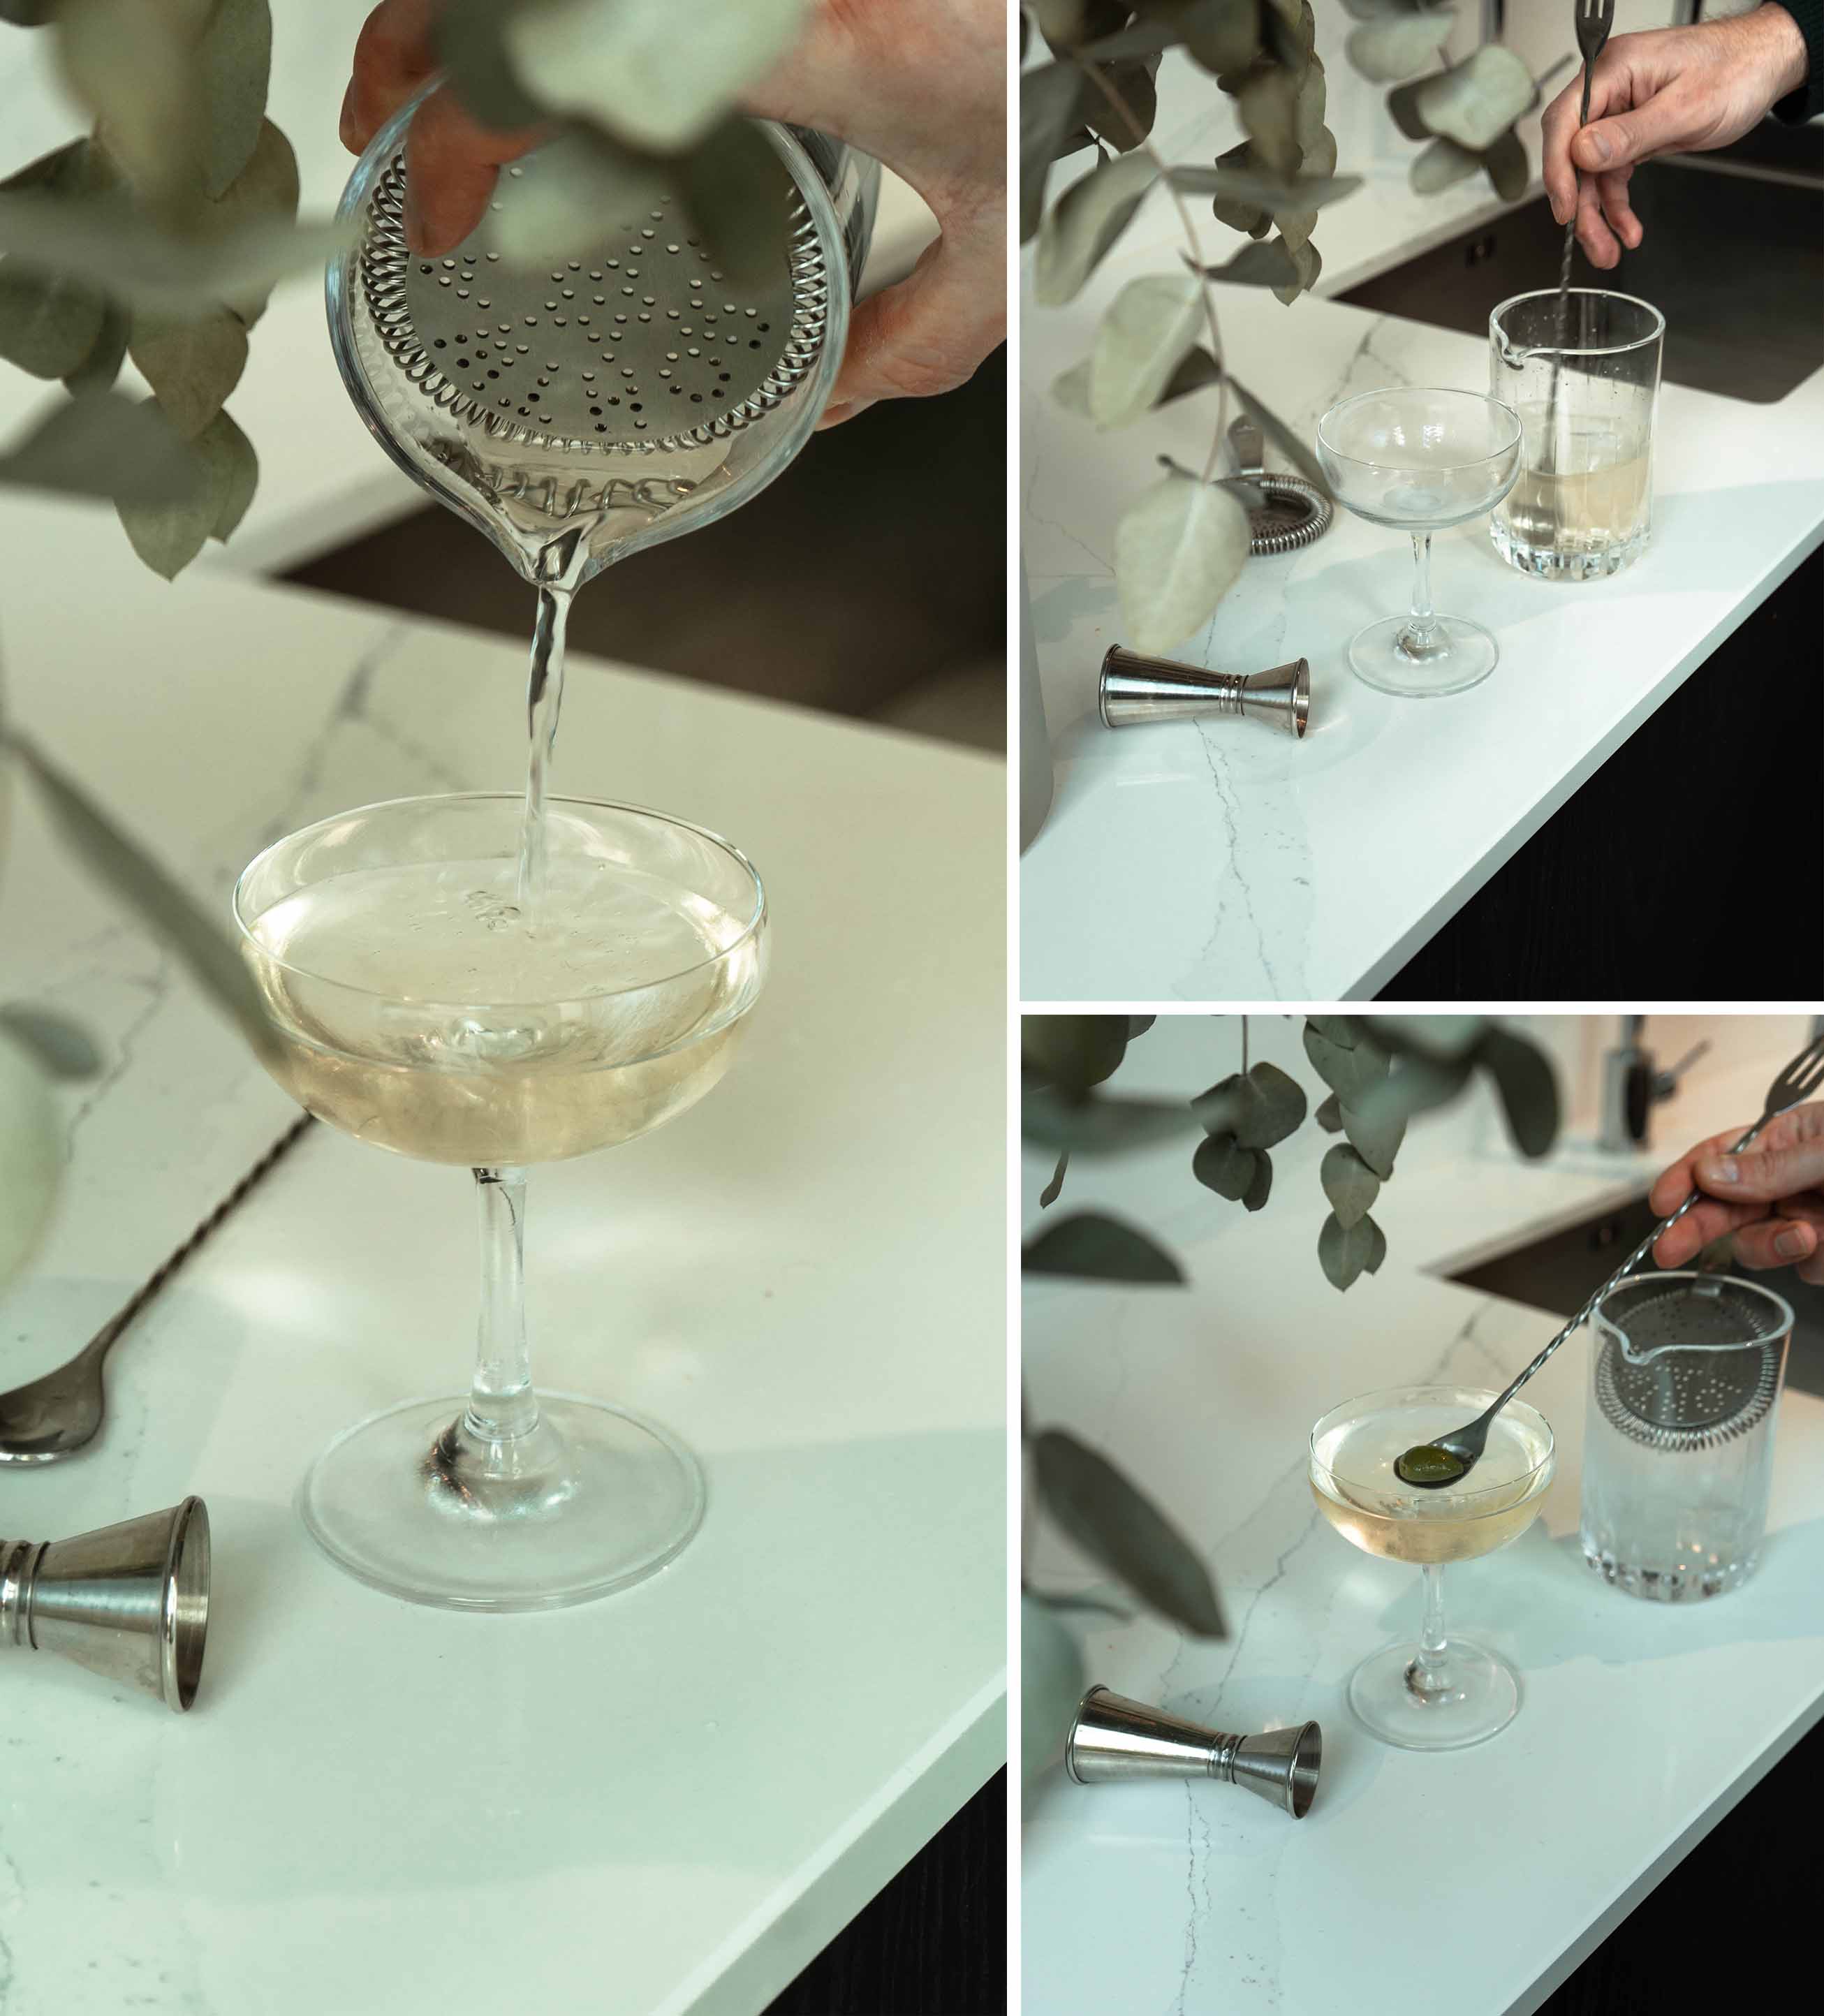 How to make a Dirty Martini